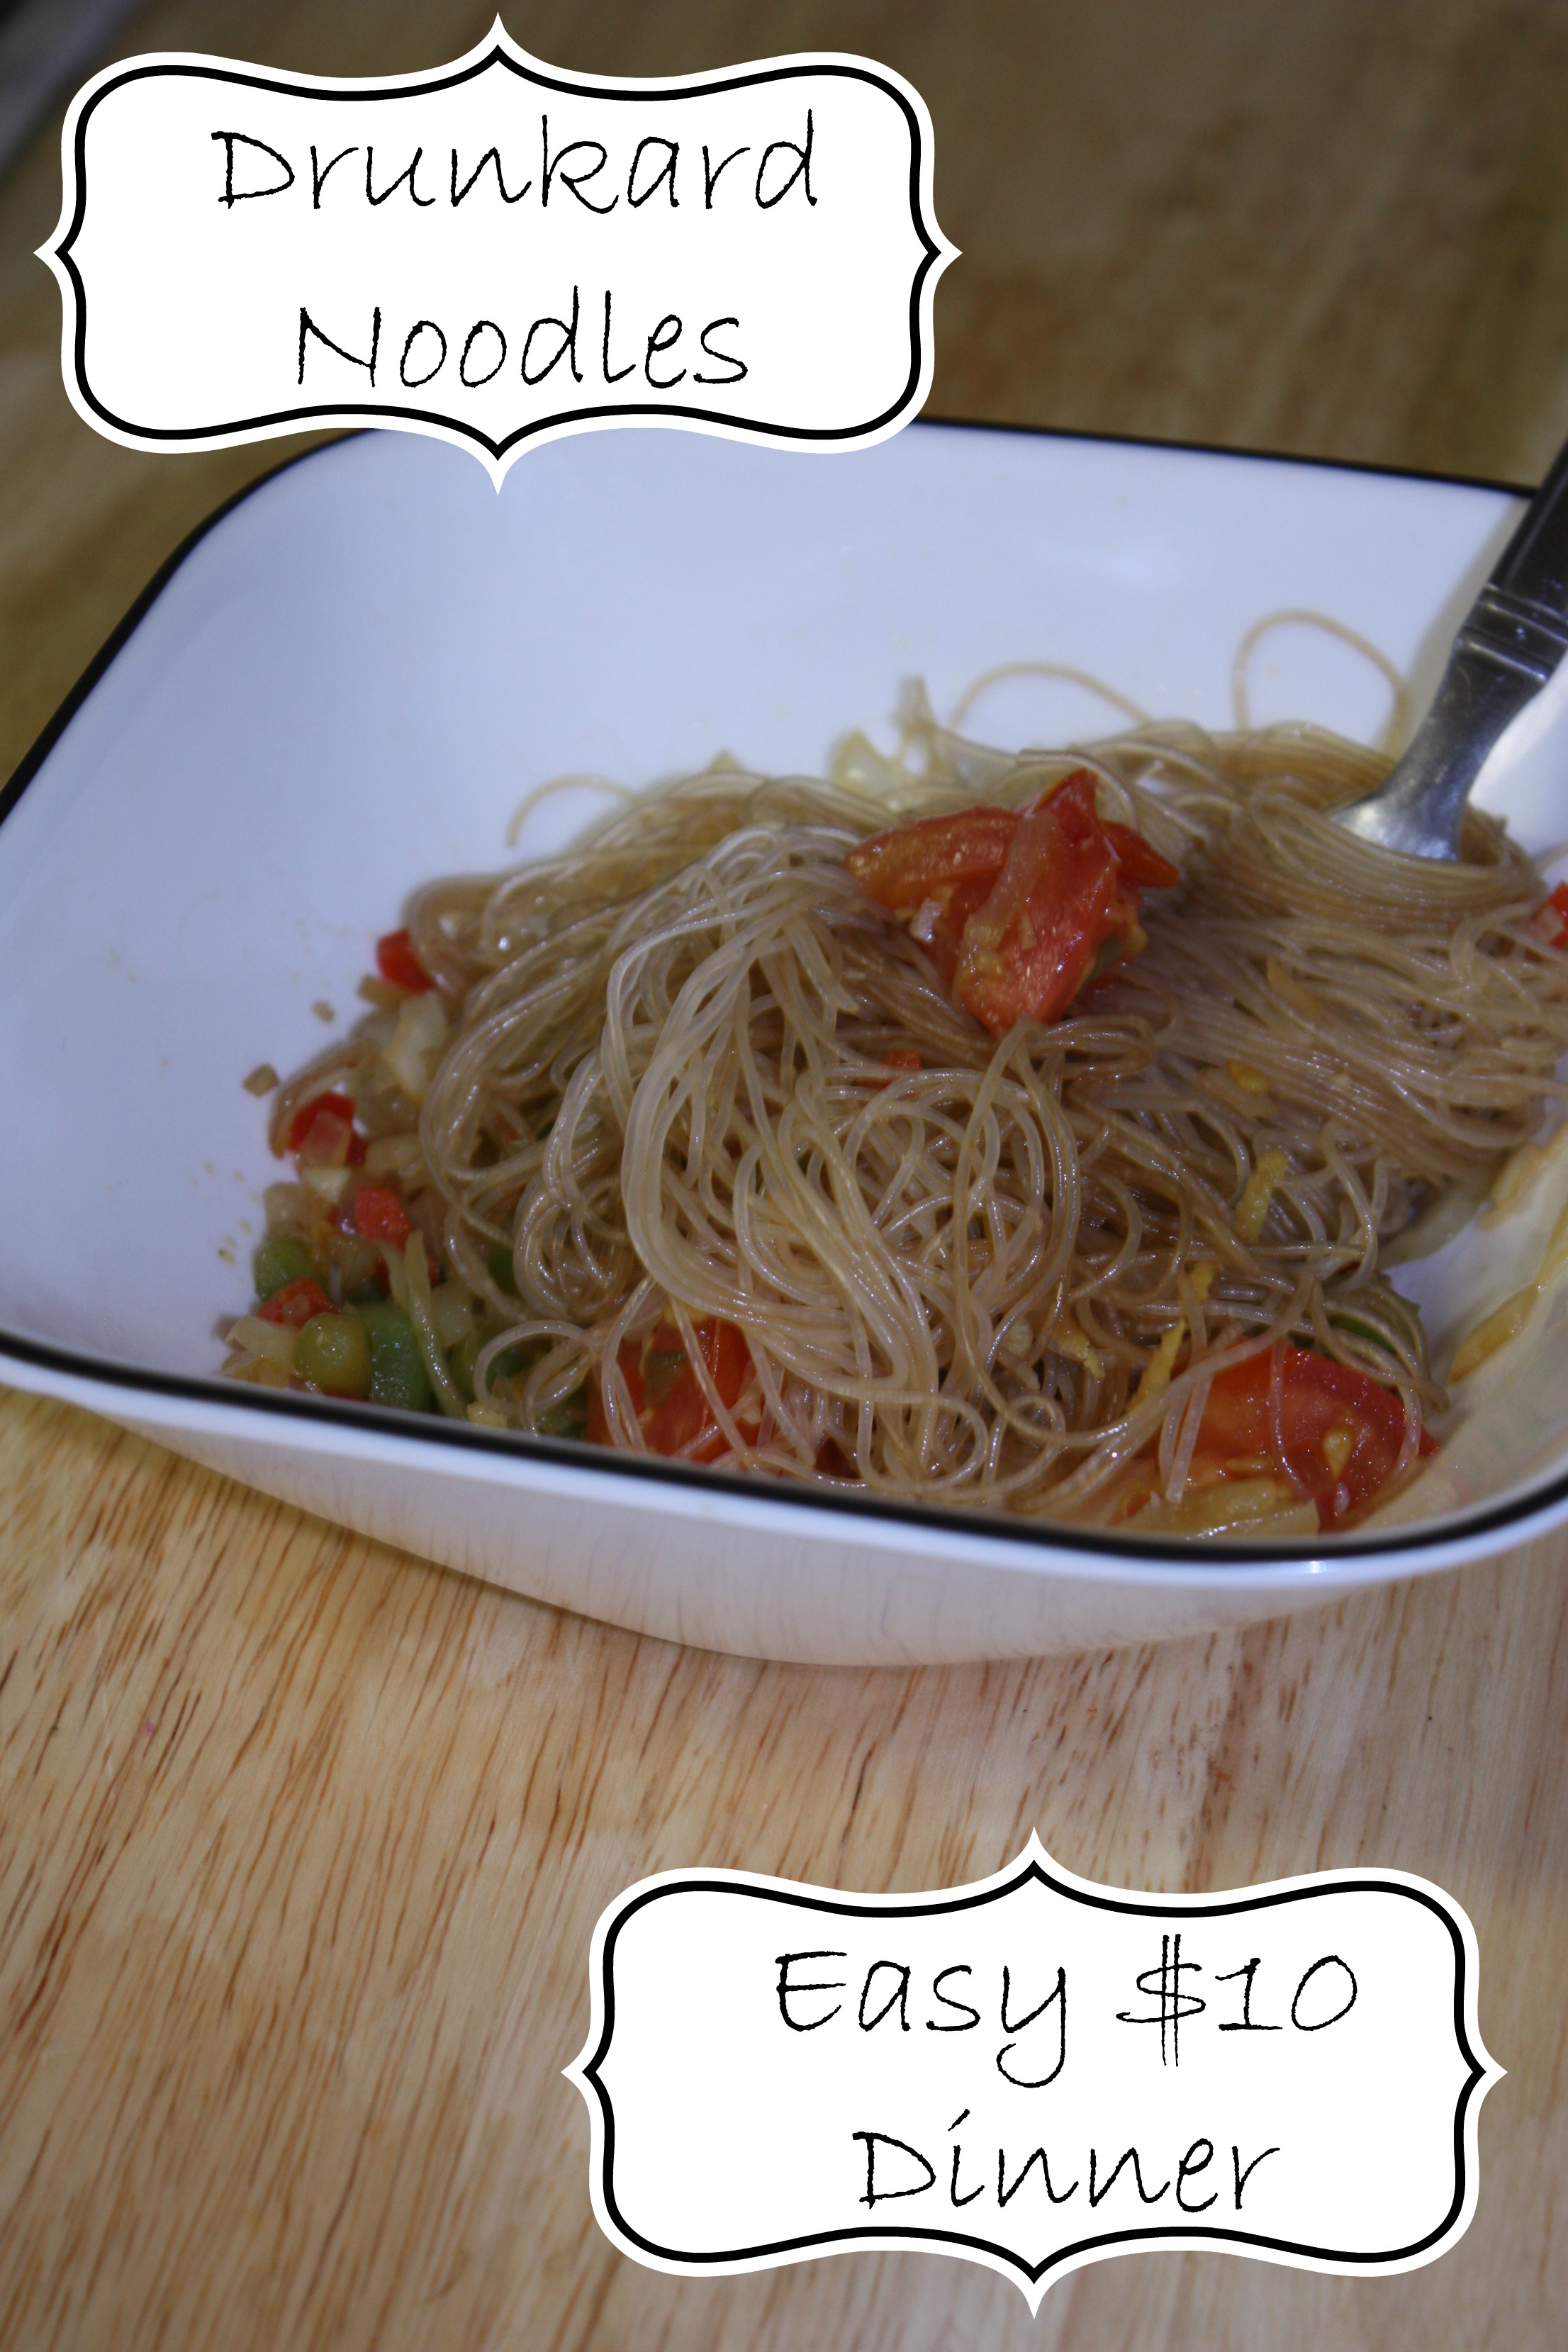 Drunkard Noodles is a simple, quick dinner. It is a quick meal to make with stir-fry rice noodles, which are super thin then it is flavored with soy sauce, basil and lemon zest. It is also perfect for less than $10 dinner.